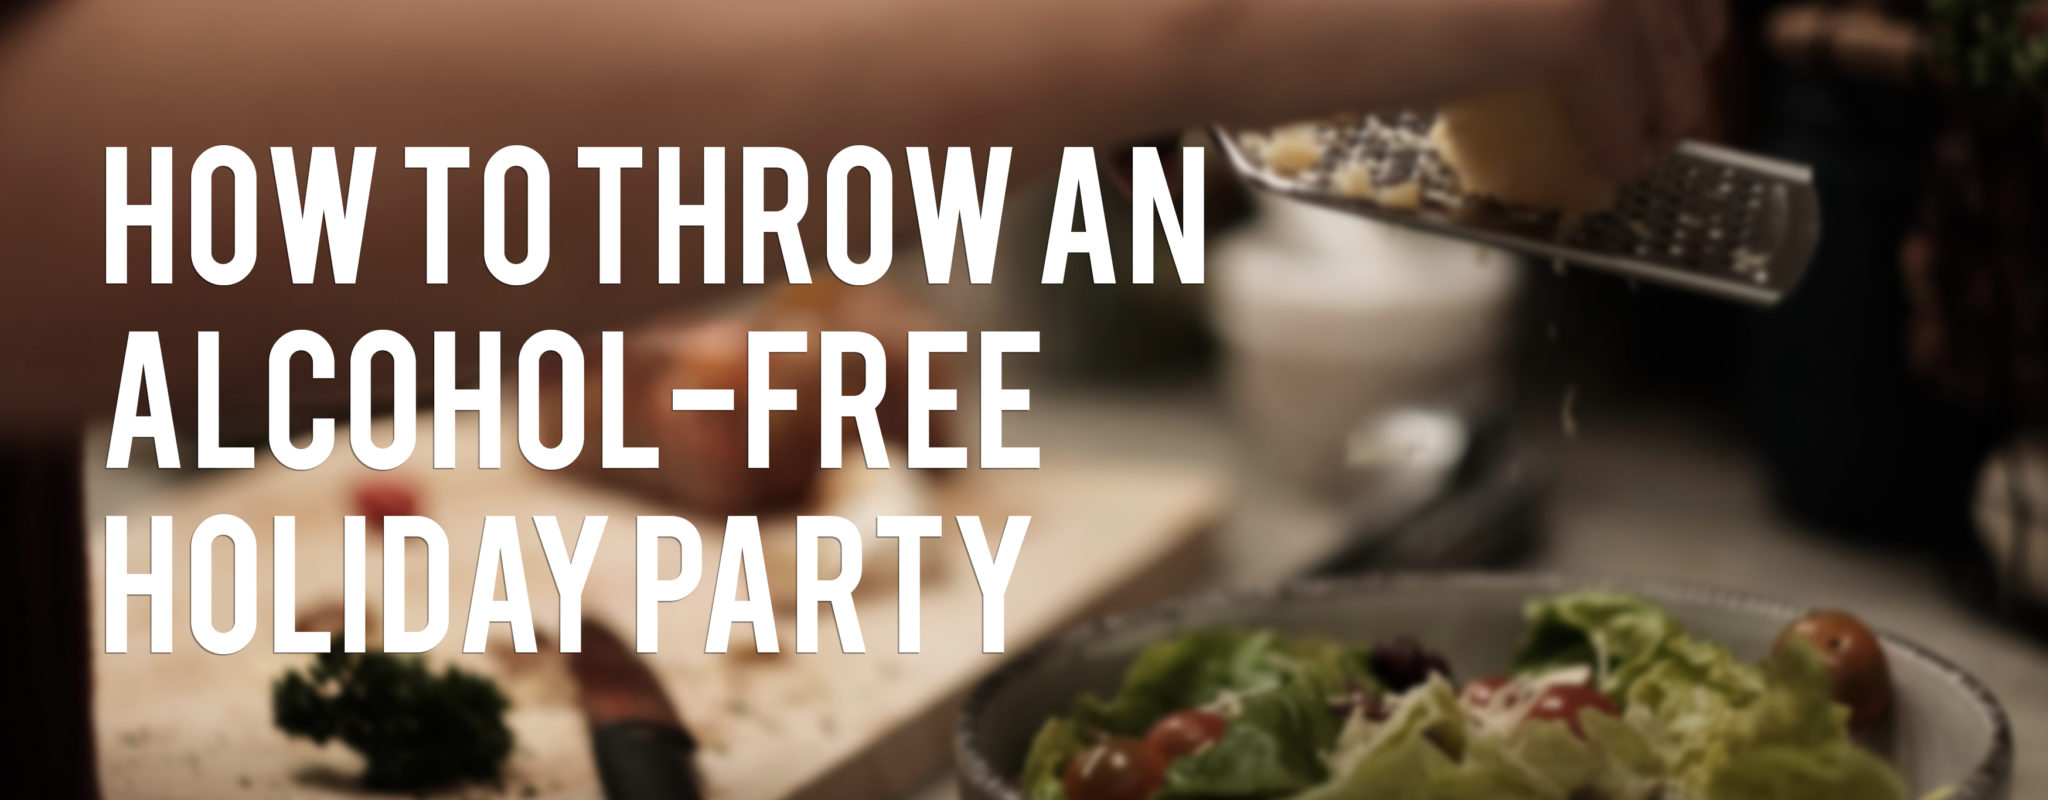 how_to_throw_a_alcohol_free_holiday_party